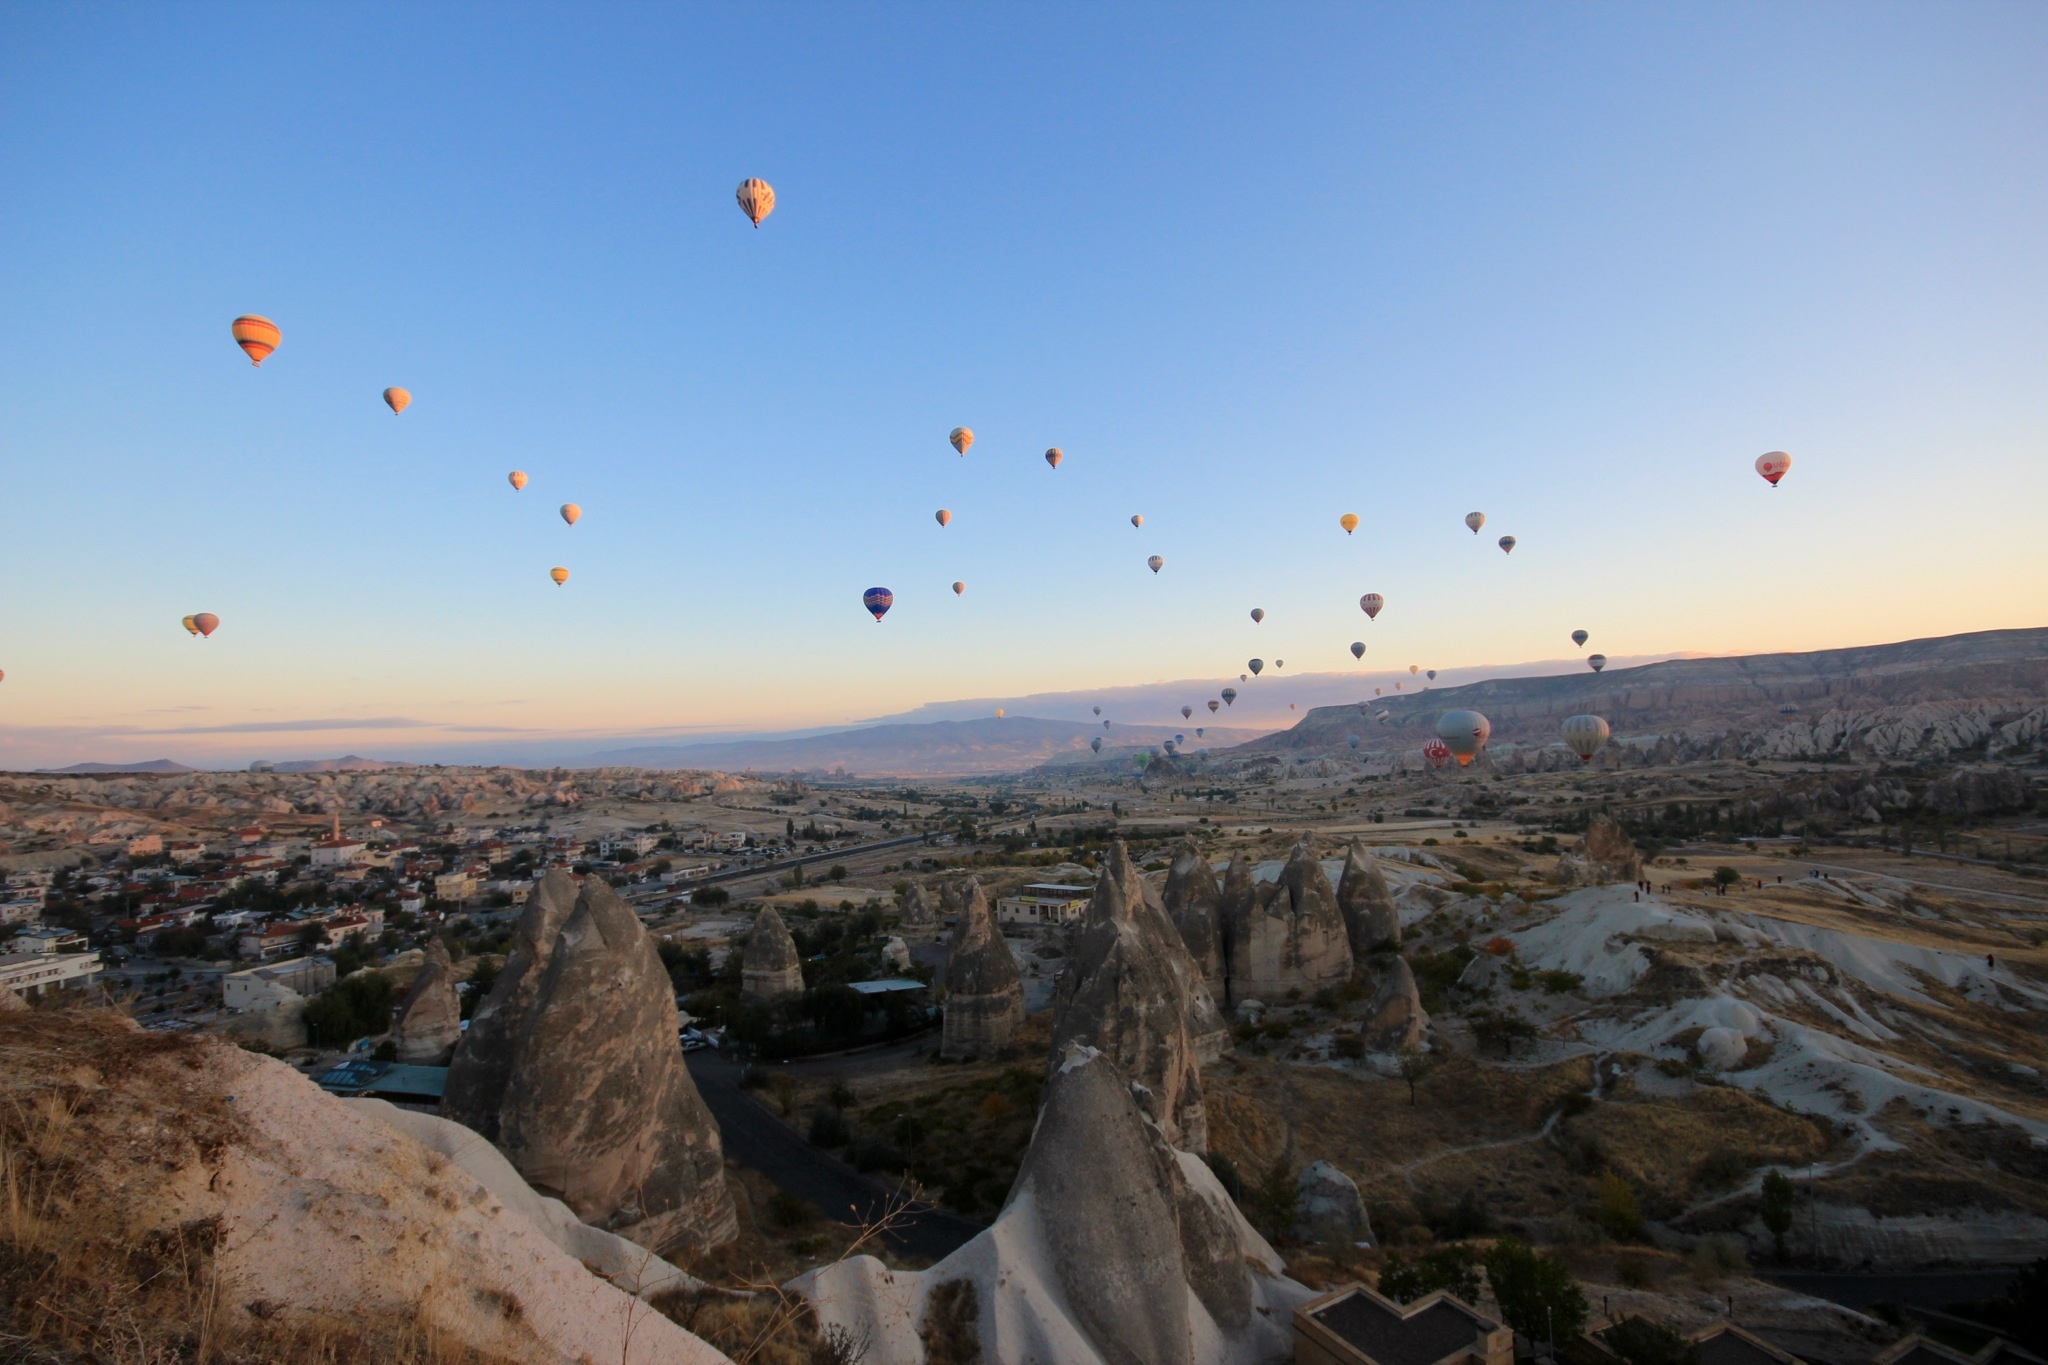 12 Photos of Cappadocia – A Magical Land with some Naughty Rock
Formations